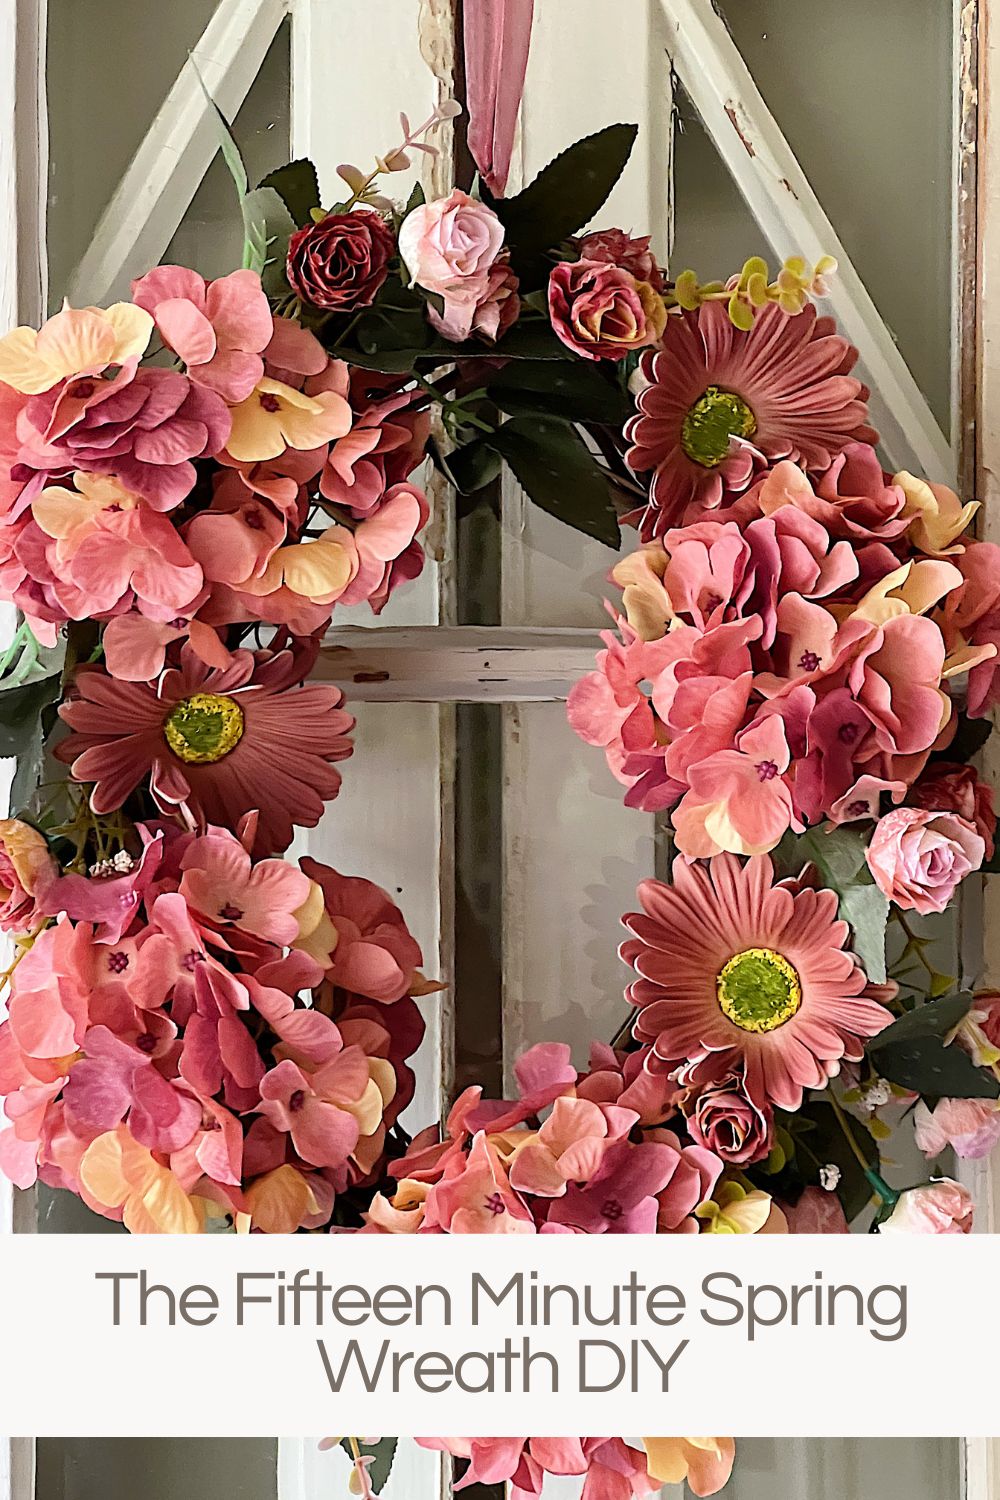 Making a spring wreath with a grapevine base and faux flowers is a fun and easy DIY project. Plus you can make this in fifteen minutes!